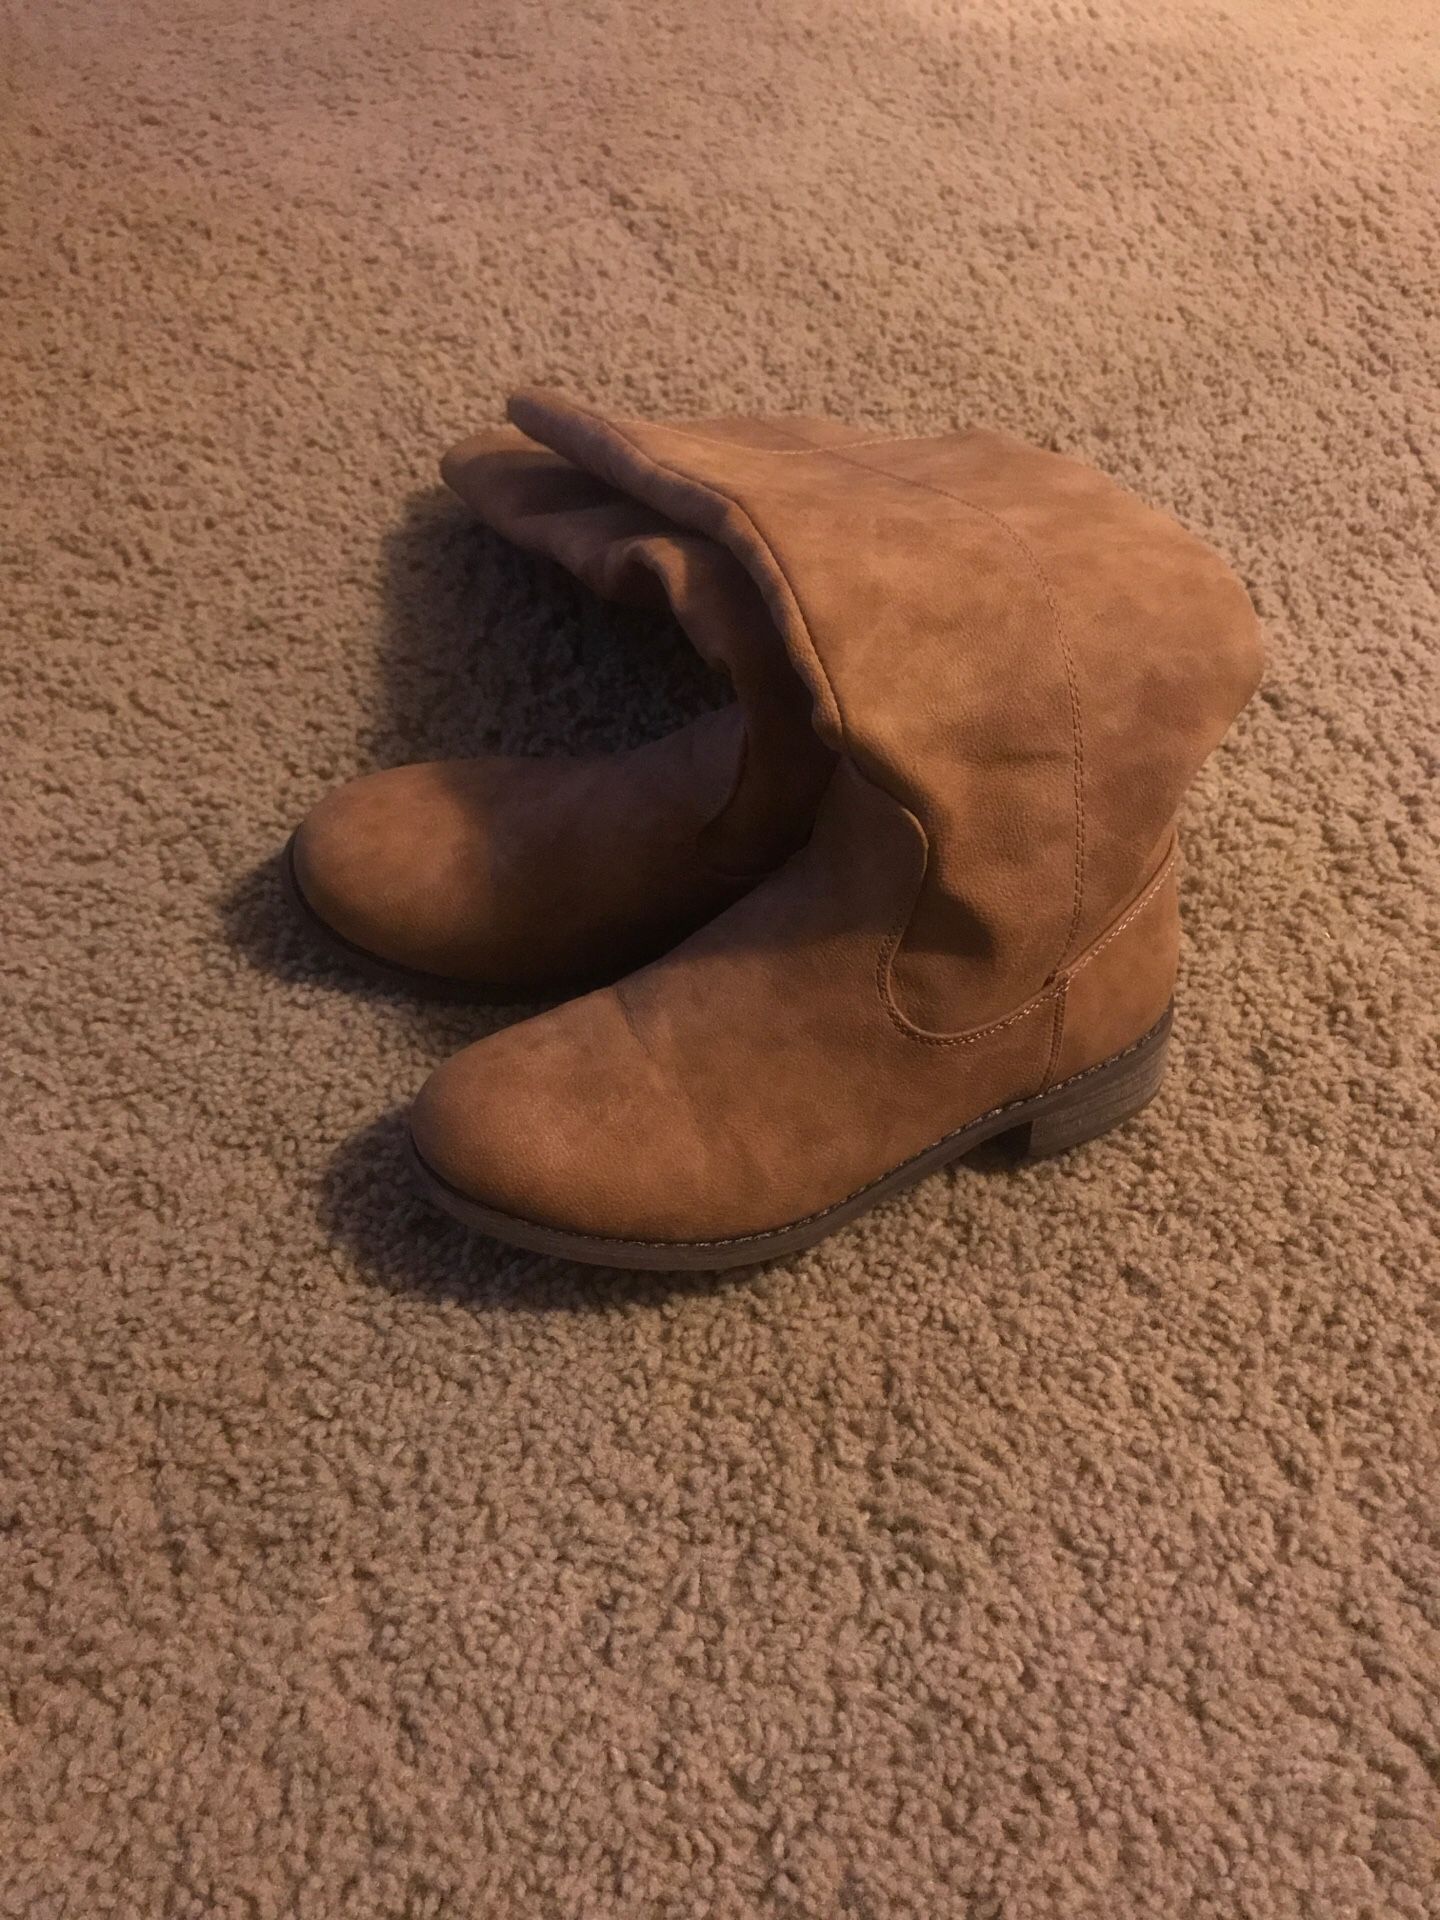 Little girl size 3 boots. Used